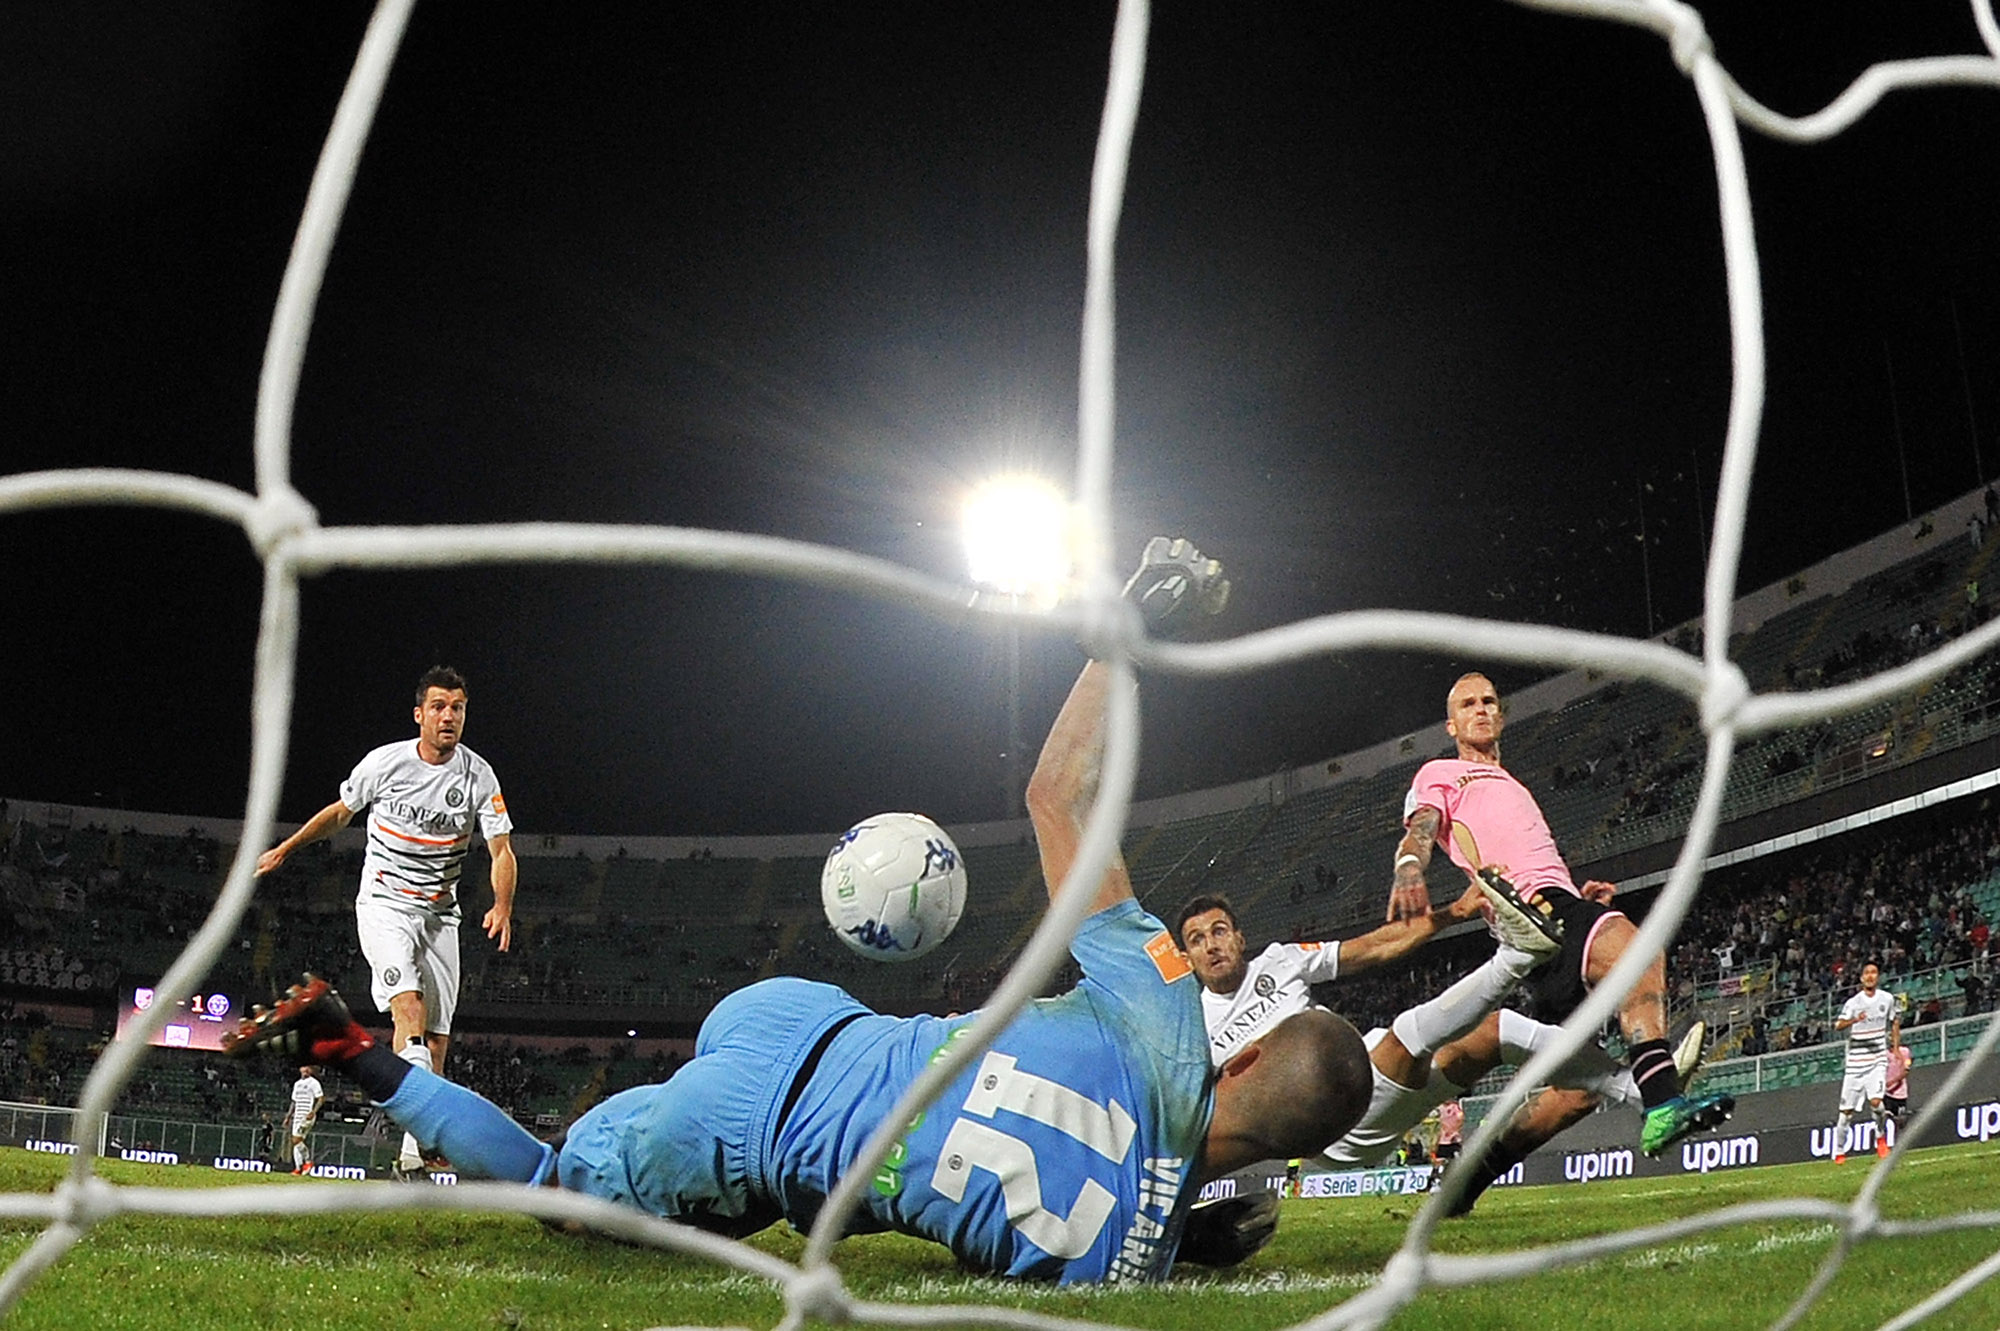 Manchester City Owners Buy Majority Stake in Sicily's Palermo FC - Bloomberg